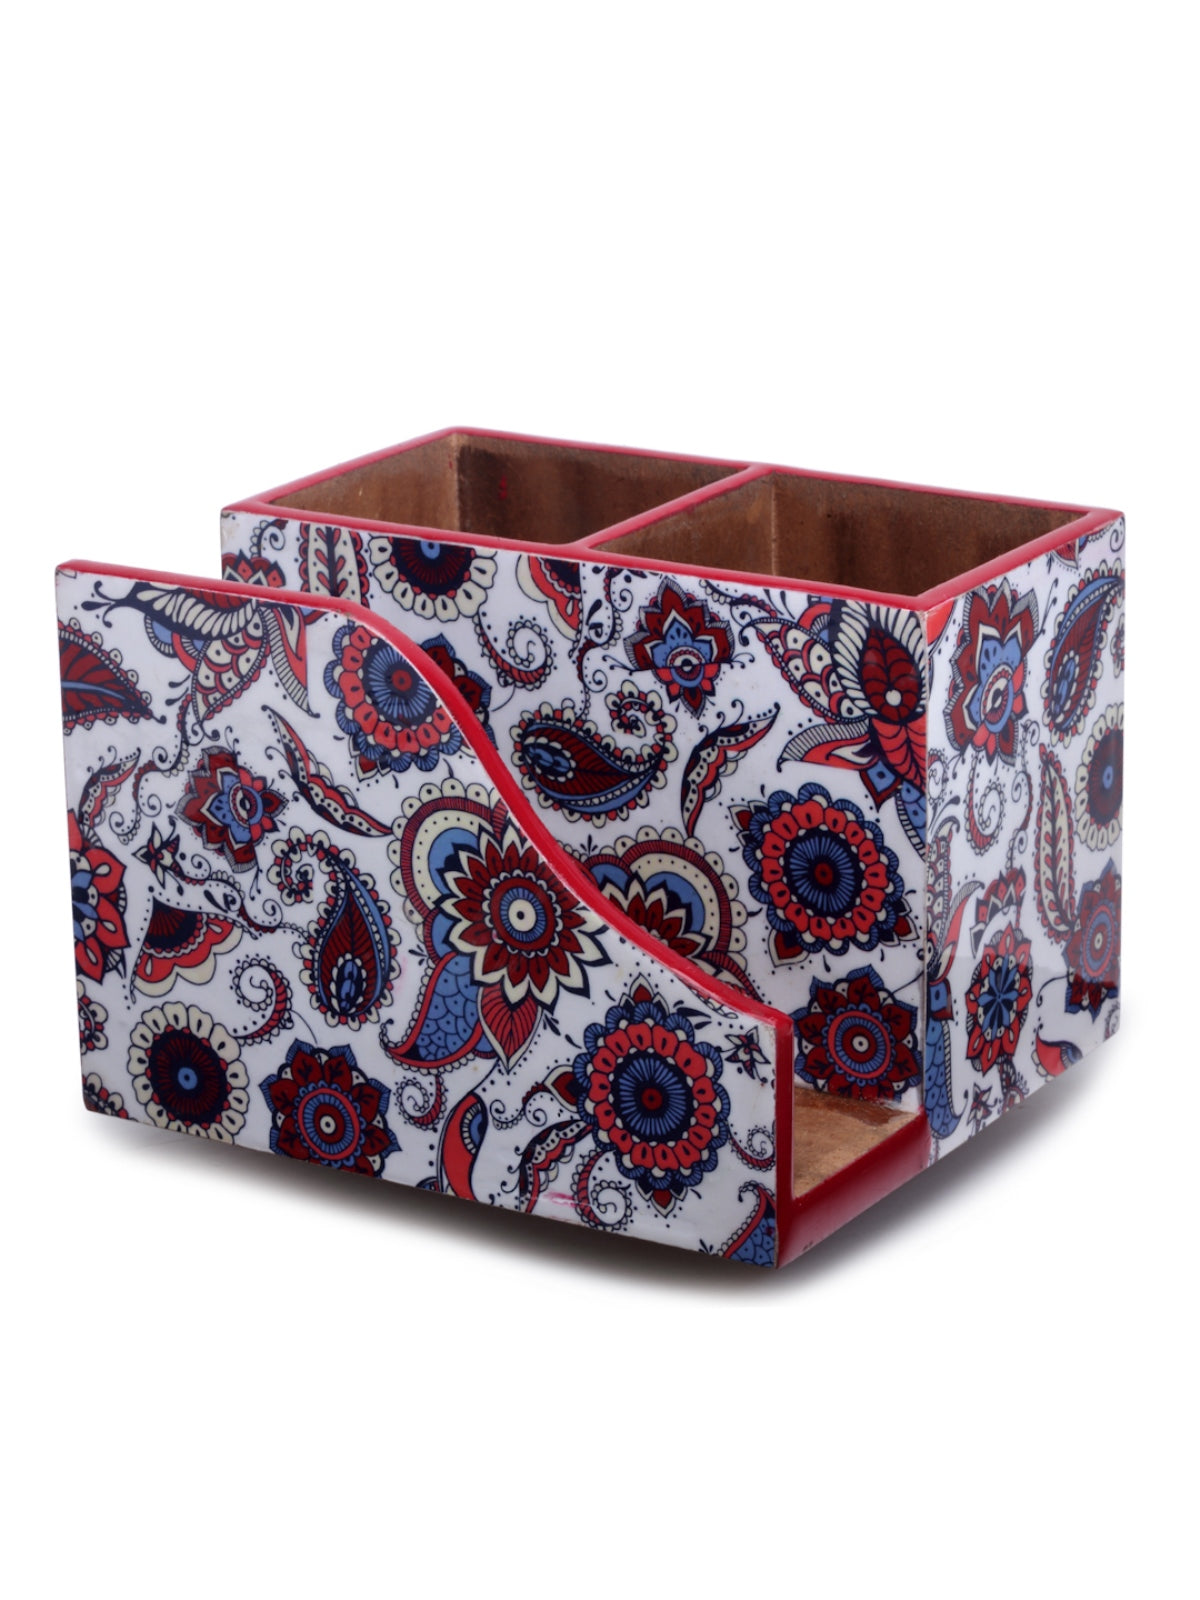 White & Blue Paisley Patterned Tissue & Cutlery Holder